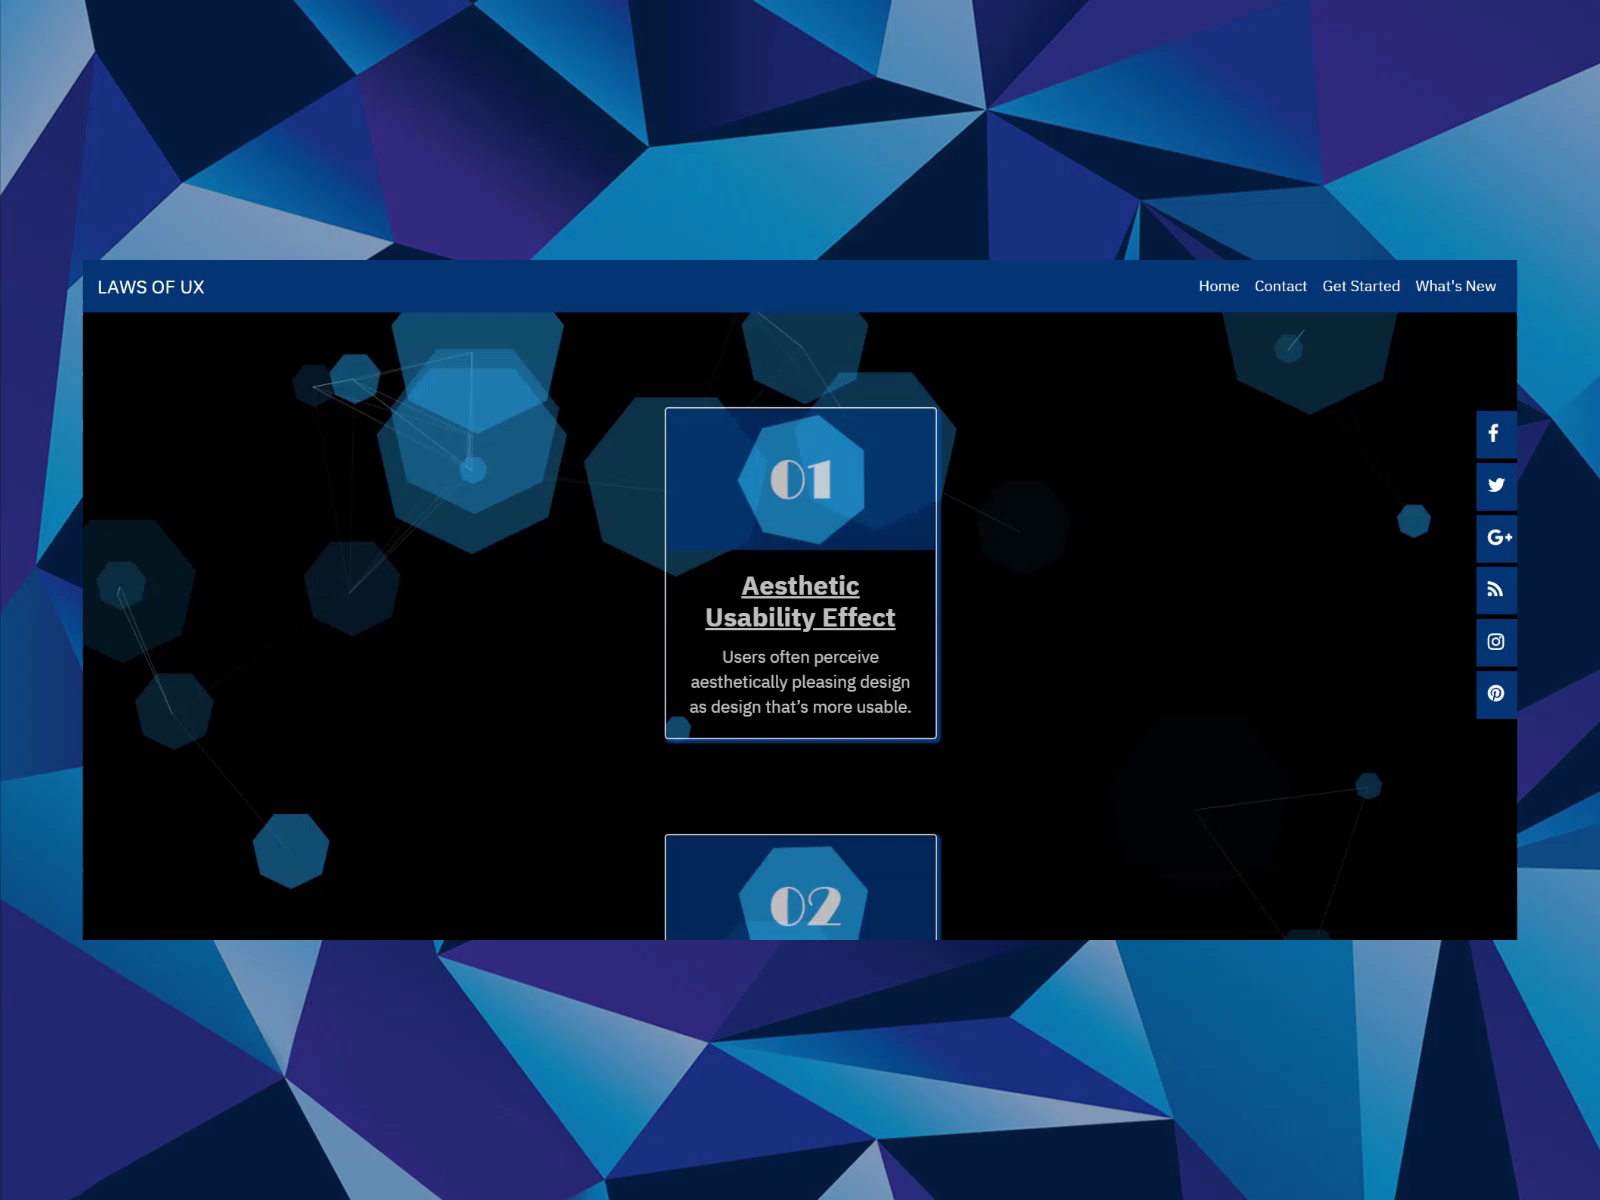 ParticleJS Interactive Landing Page - Polygons by Samer Siam on Dribbble